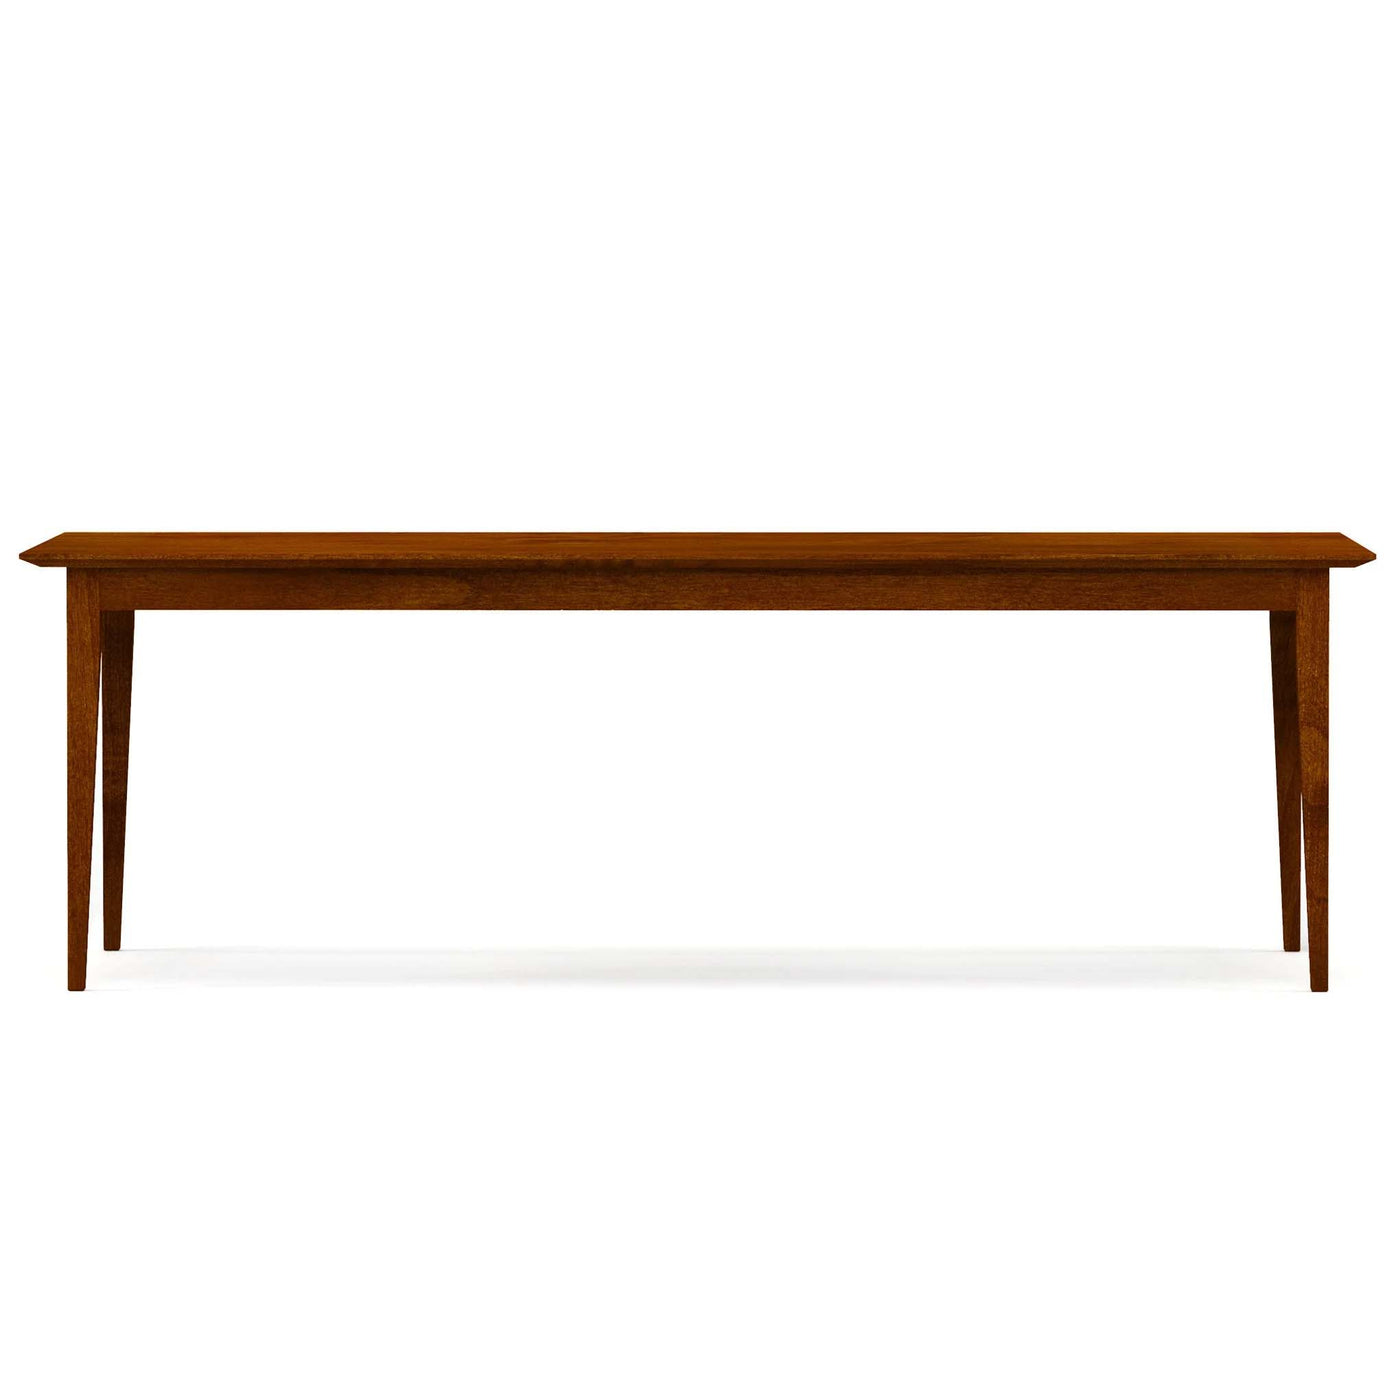 Stickley Gable Road 92 Inch Dining Table